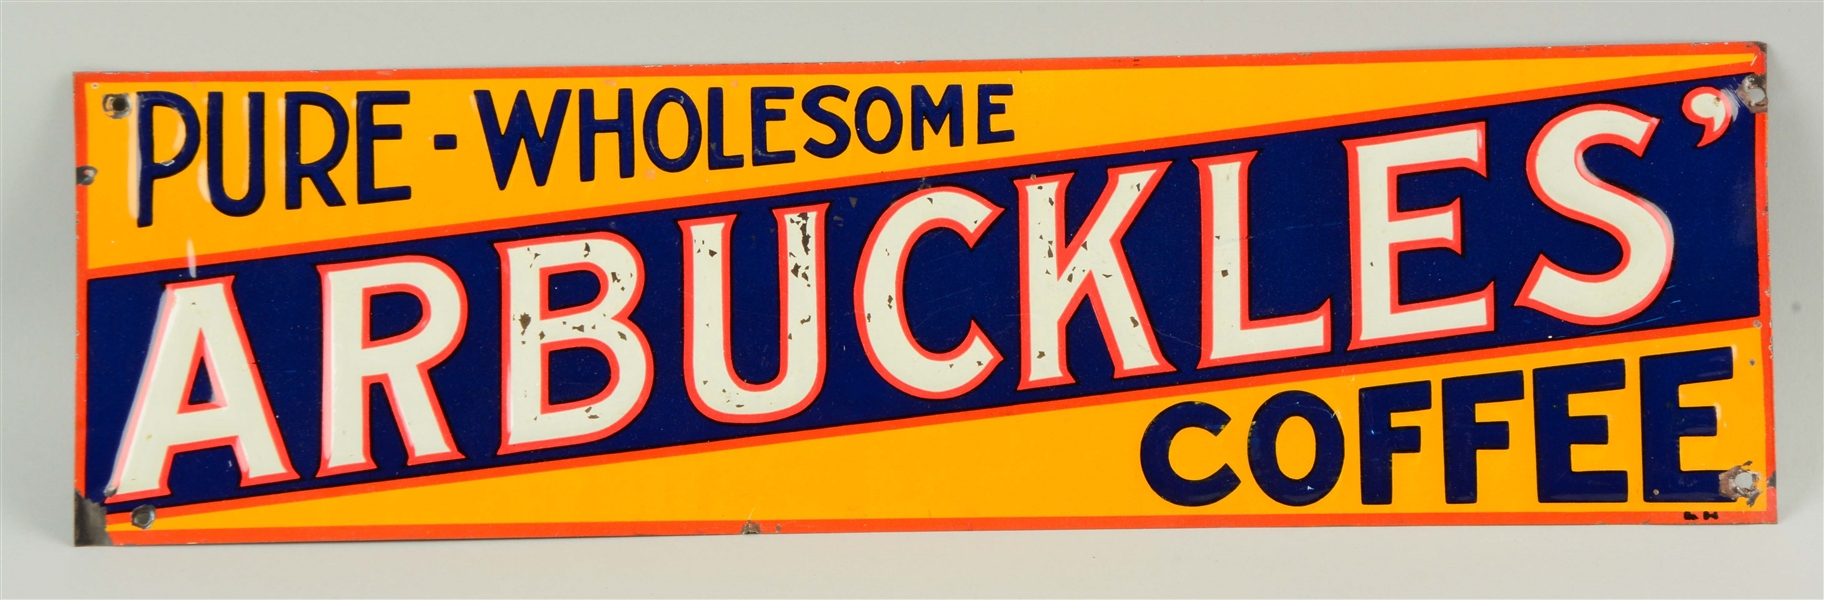 ADVERTISING TIN "ARBUCKLES COFFEE" SIGN.